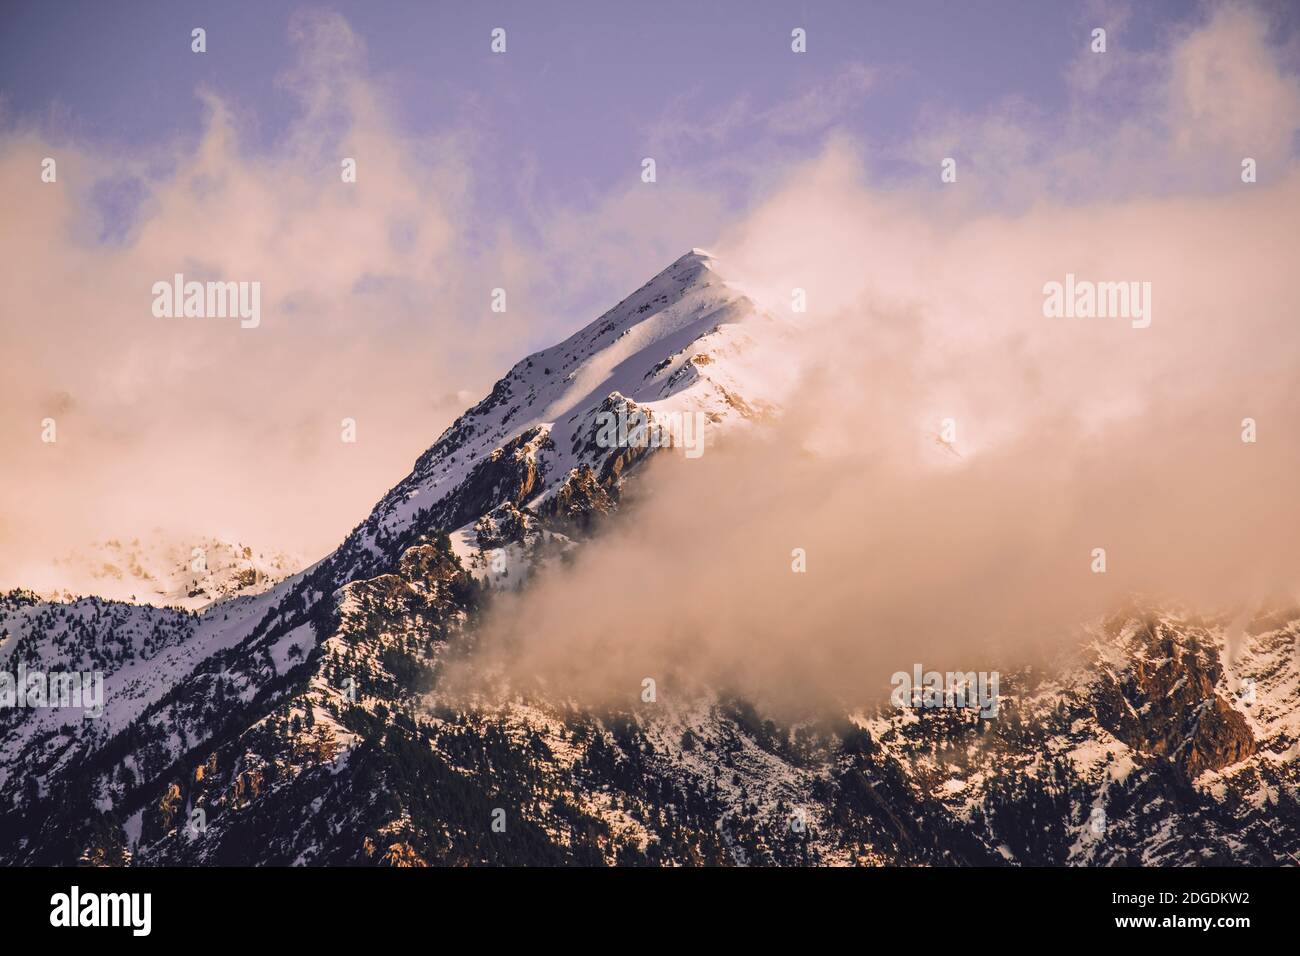 Scenic view of snowcapped mountain against cloudy sky in the Pyrenees at sunrise, Panticosa, Huesca, Spain Stock Photo